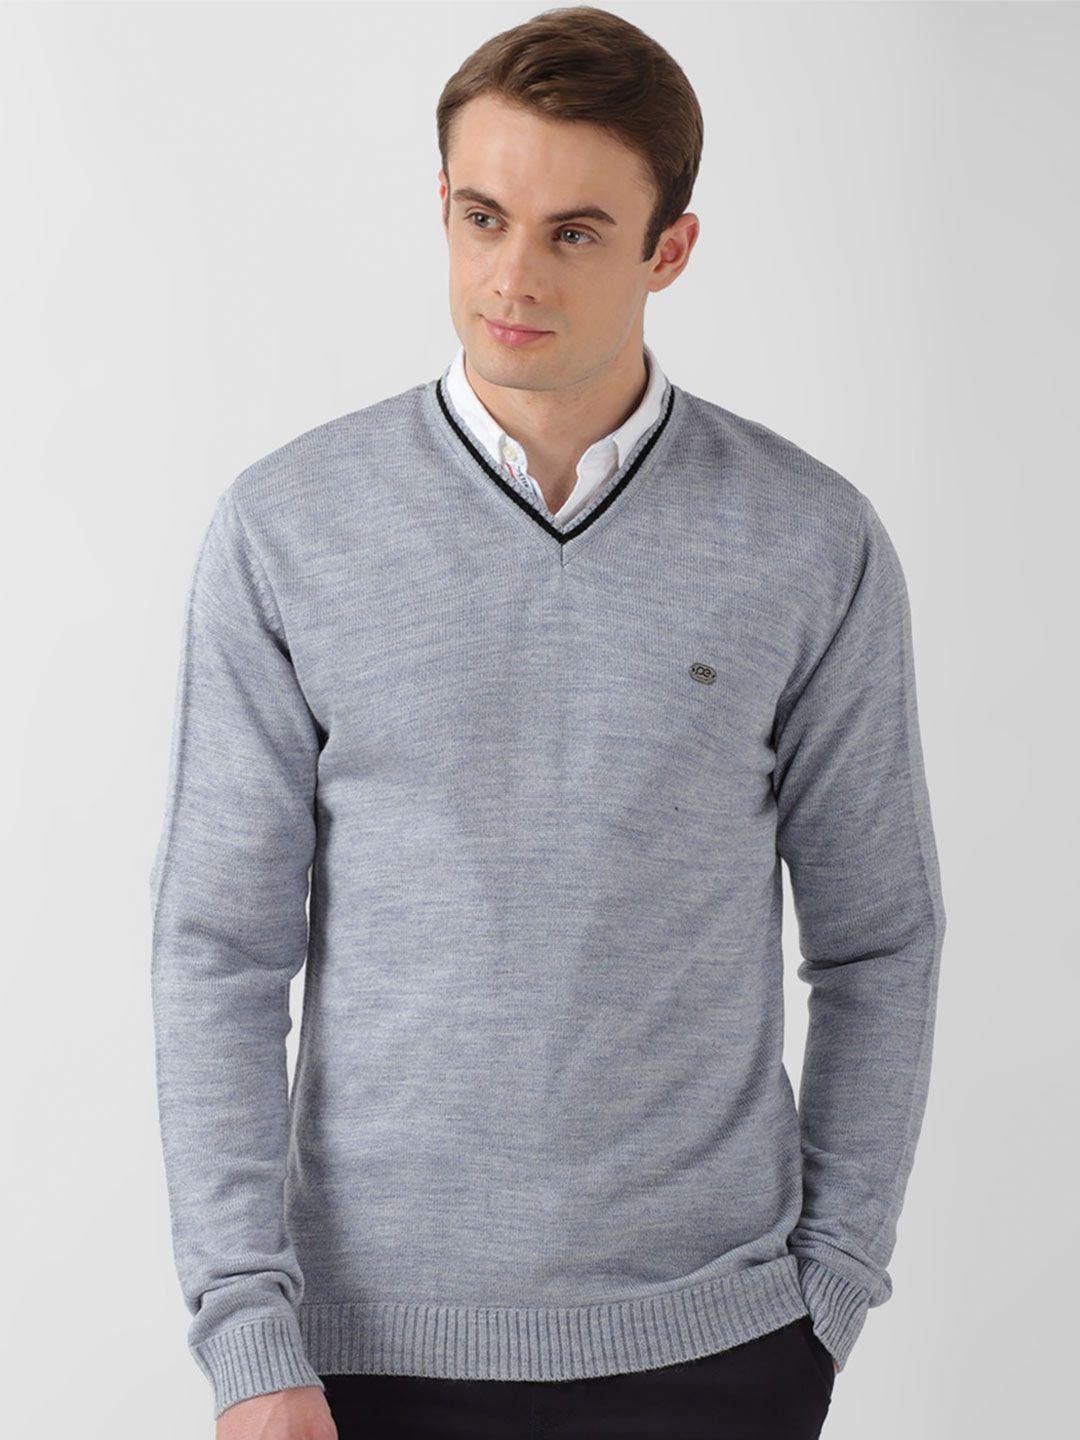 peter england casuals acrylic textured v neck pullover sweater